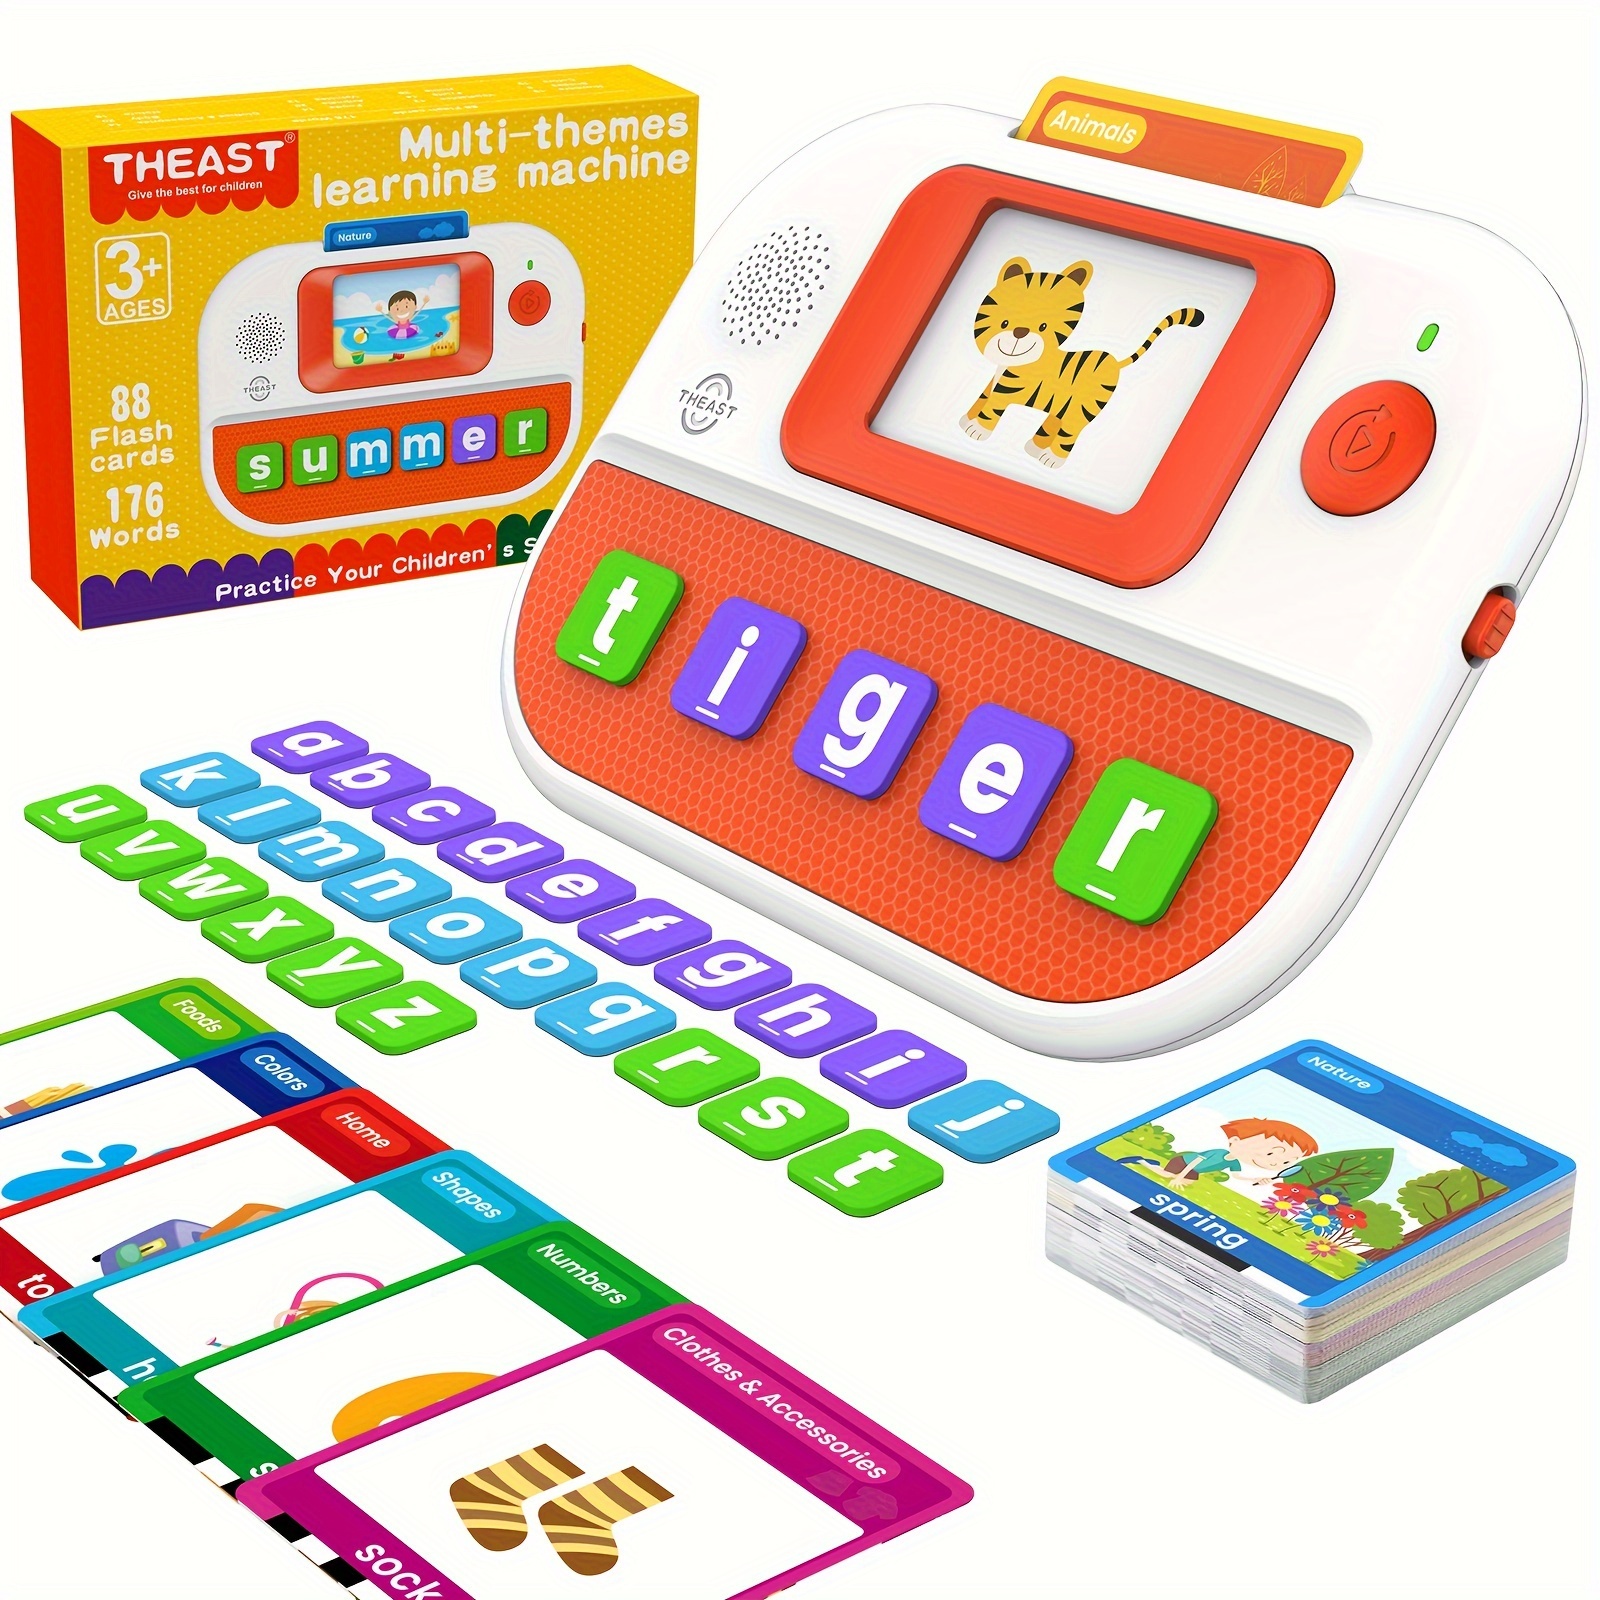 

Learning Educational Toys For Kids 1st 2nd Grades, Talking Flash Cards With 176 Sight Words, Alphabet Spelling Games For 3 4 5 6 7 8 Years Old, Speech Therapy Materials, Holiday Birthday Gifts